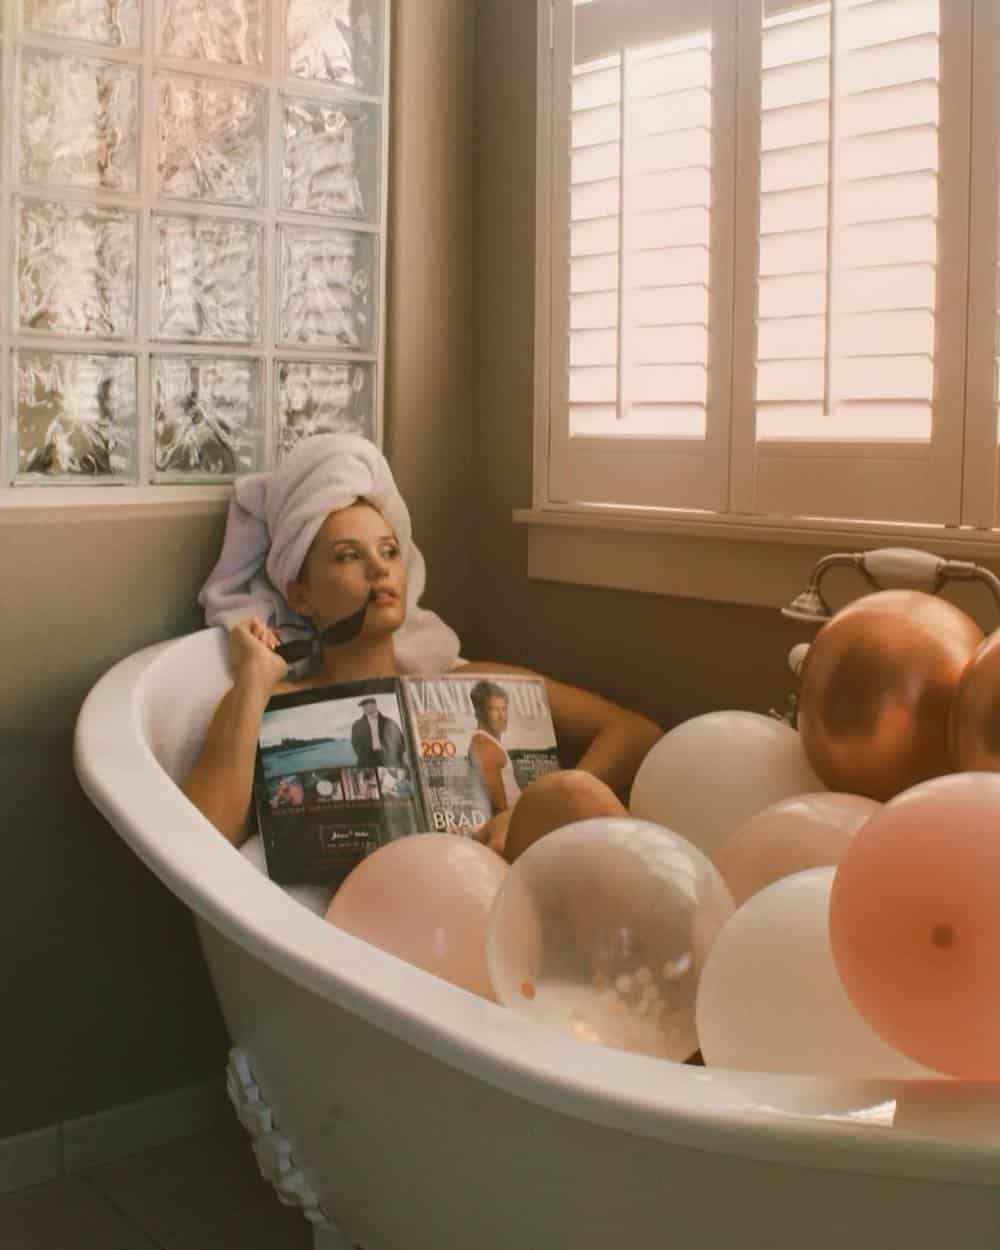 woman having a birthday photoshoot with balloons in a bathtub